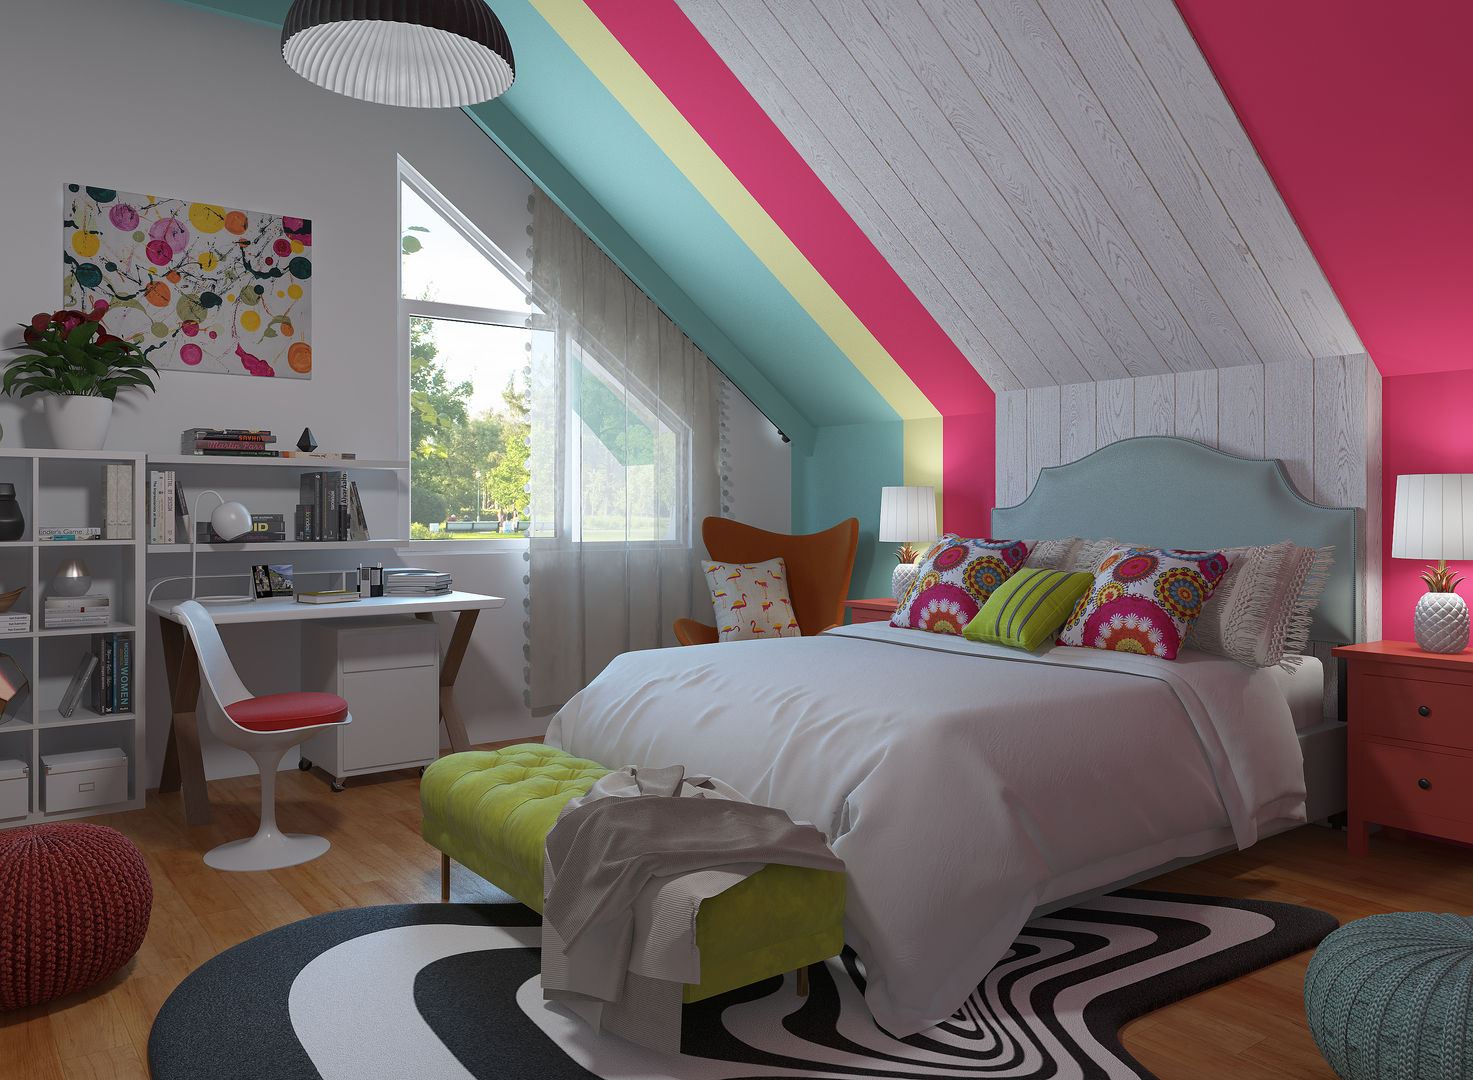 Eclectic -Pop Art decoration homify Quartos ecléticos bedroom,decorate bedroom,how to decorate,pop art style,pop art bedroom,3d design,interior design,rendering,home deco,colourful,customized designs